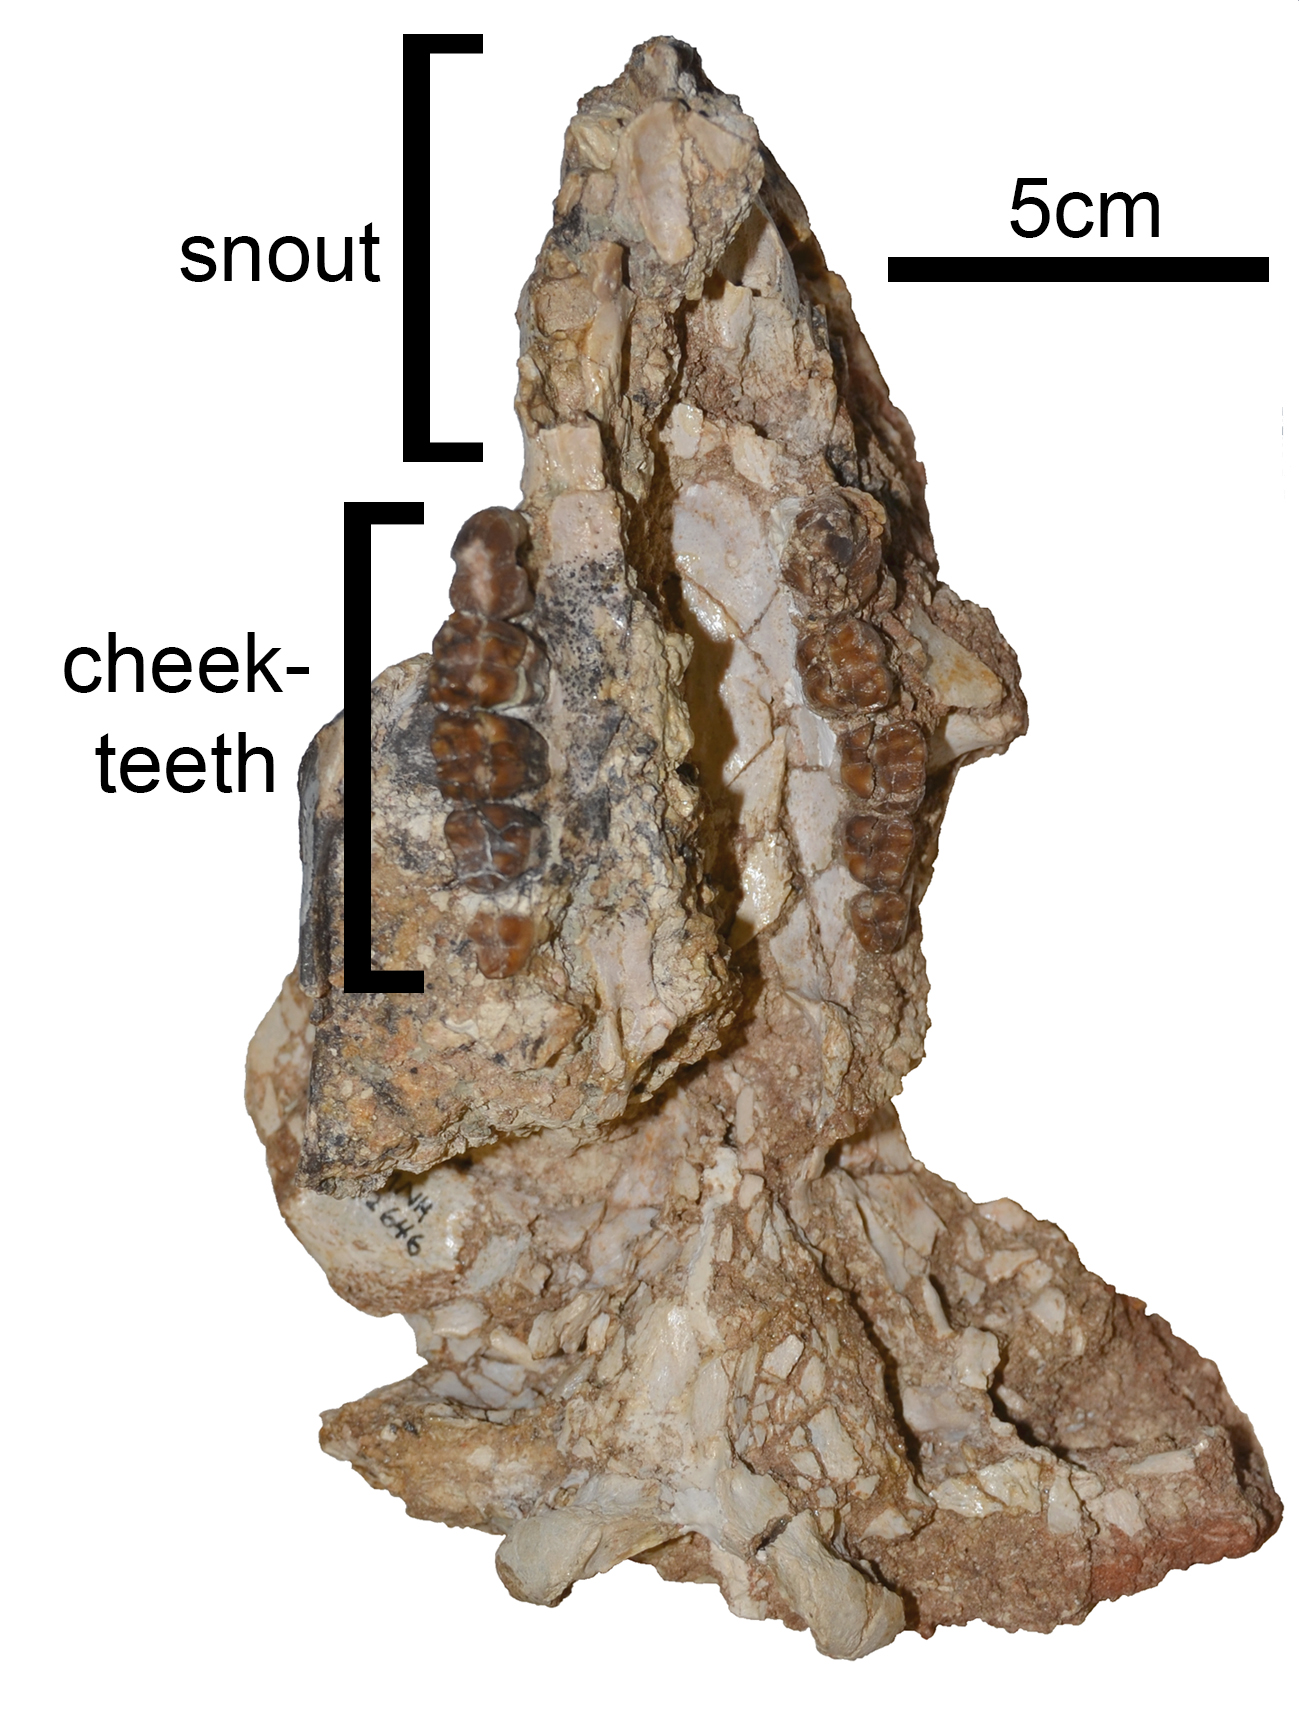 The skull of the giant wombat relative